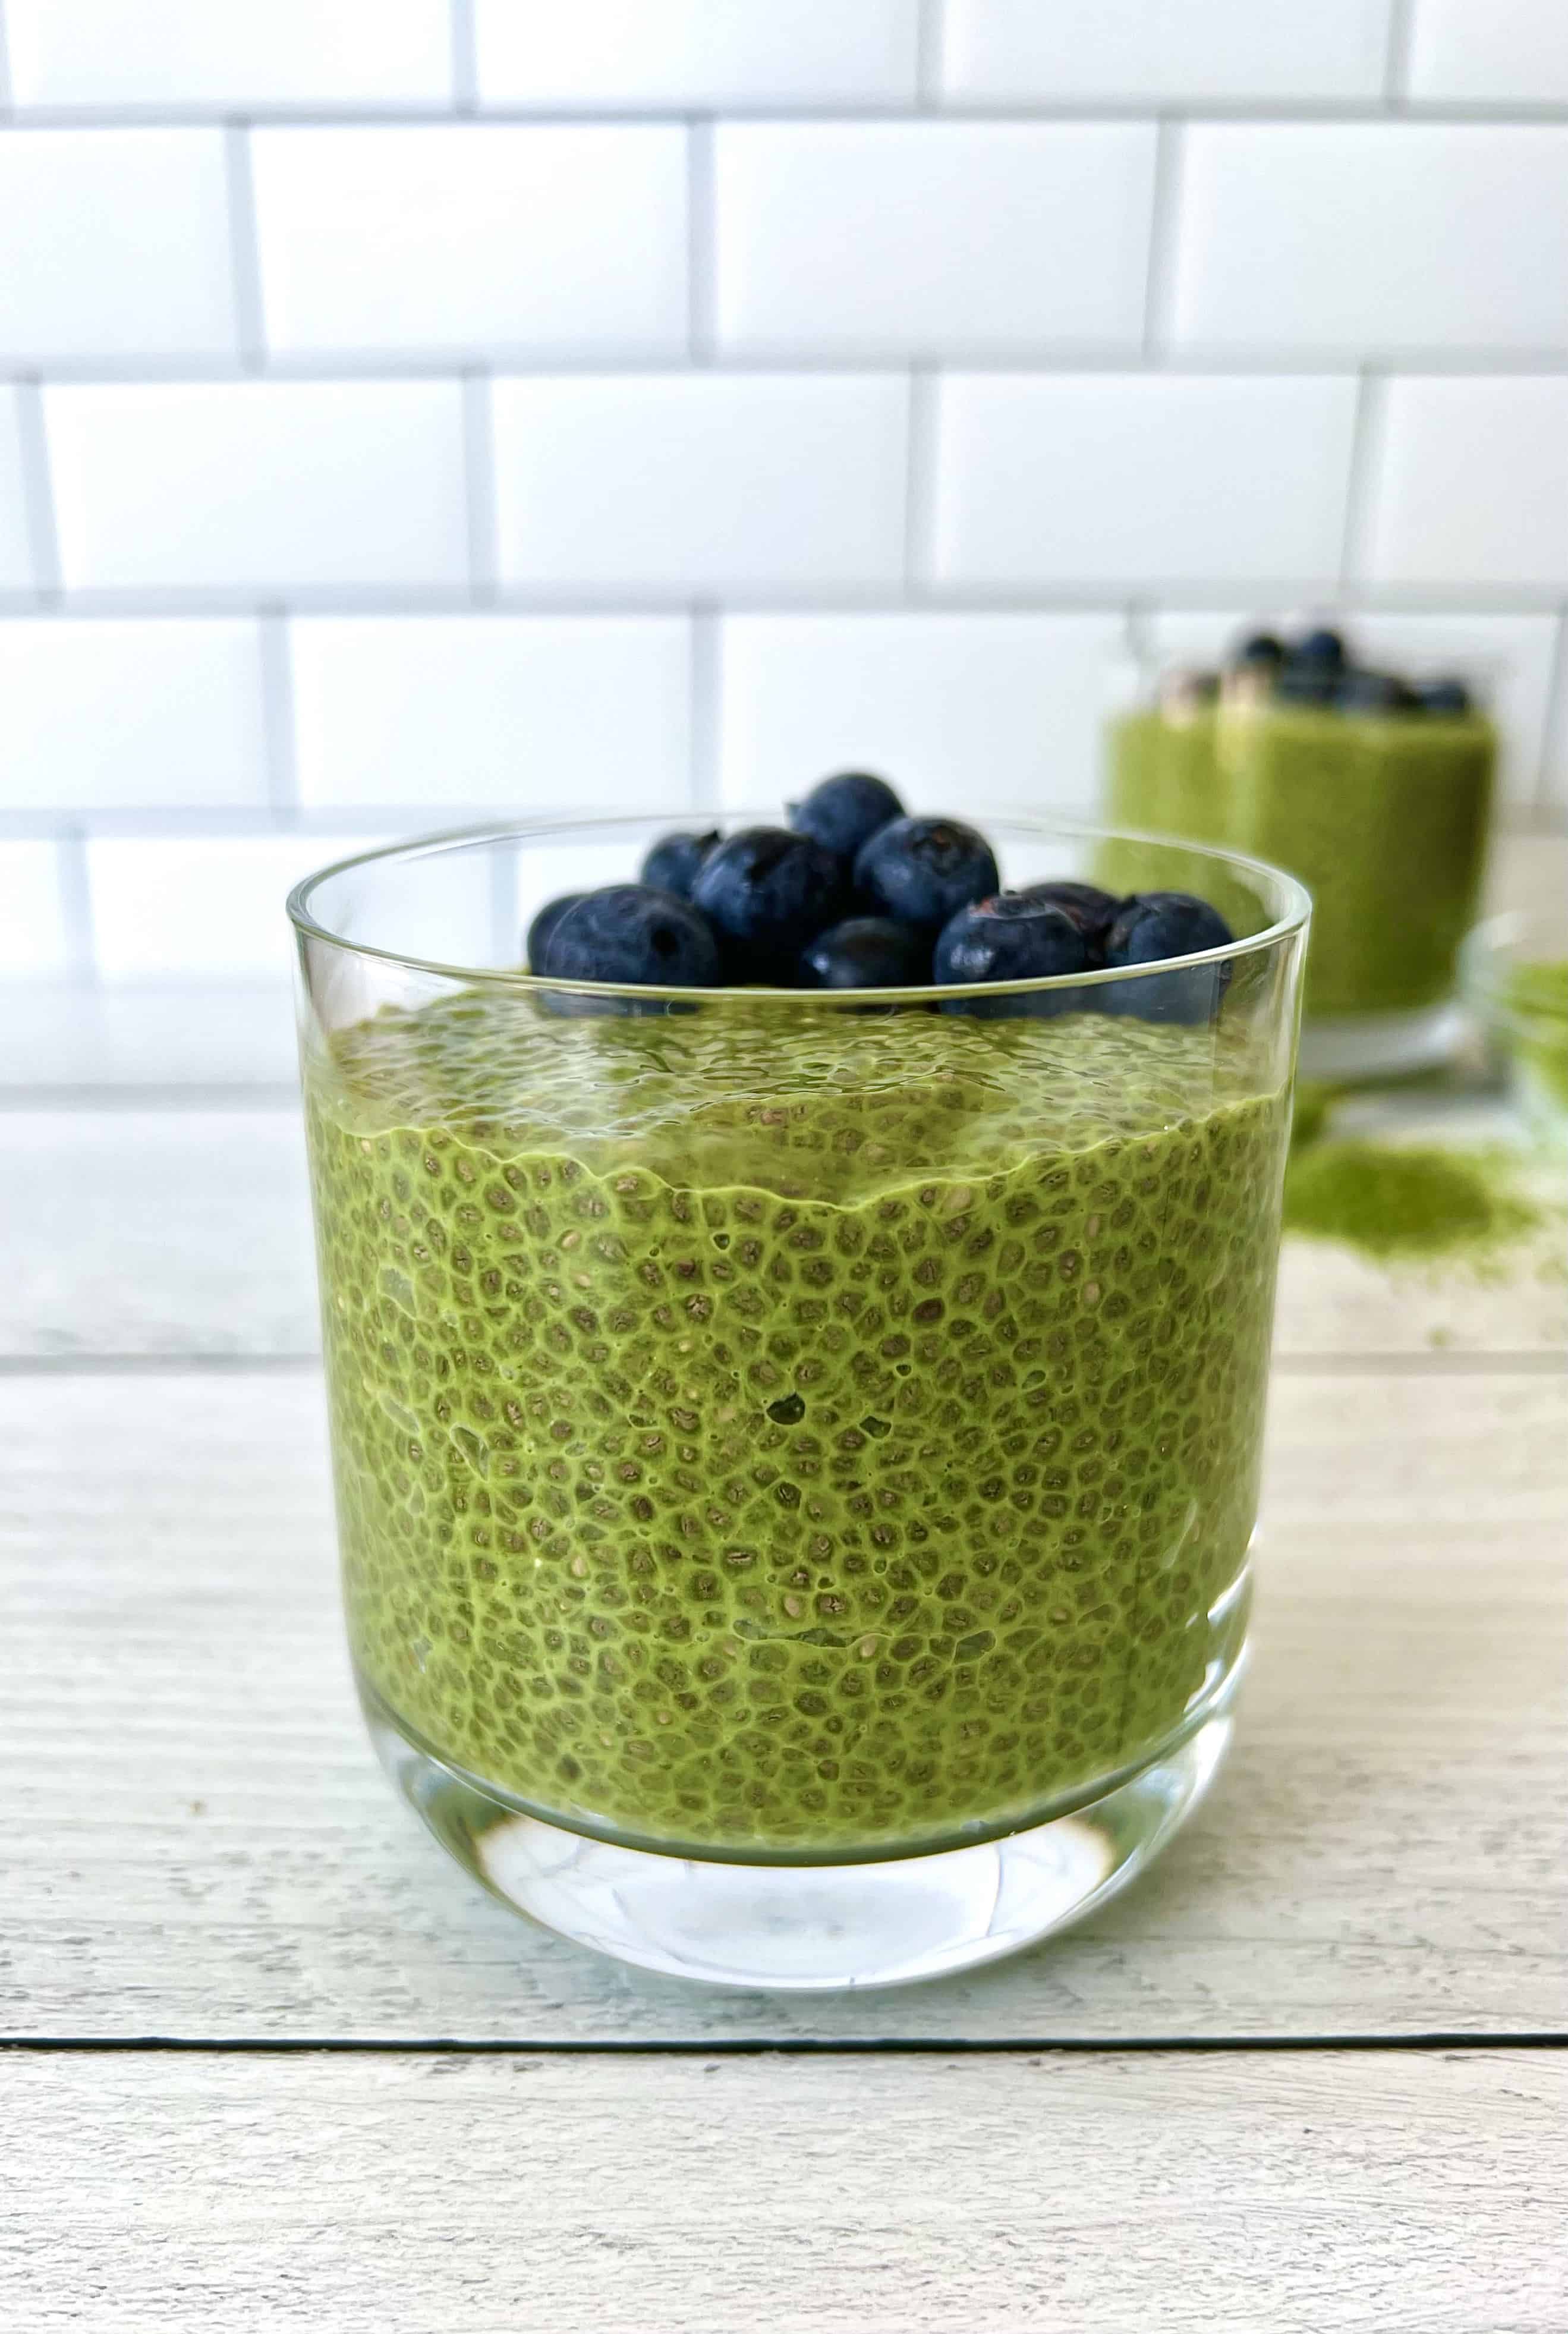 Keto chia pudding made with green tea in a glass and topped with blueberries.